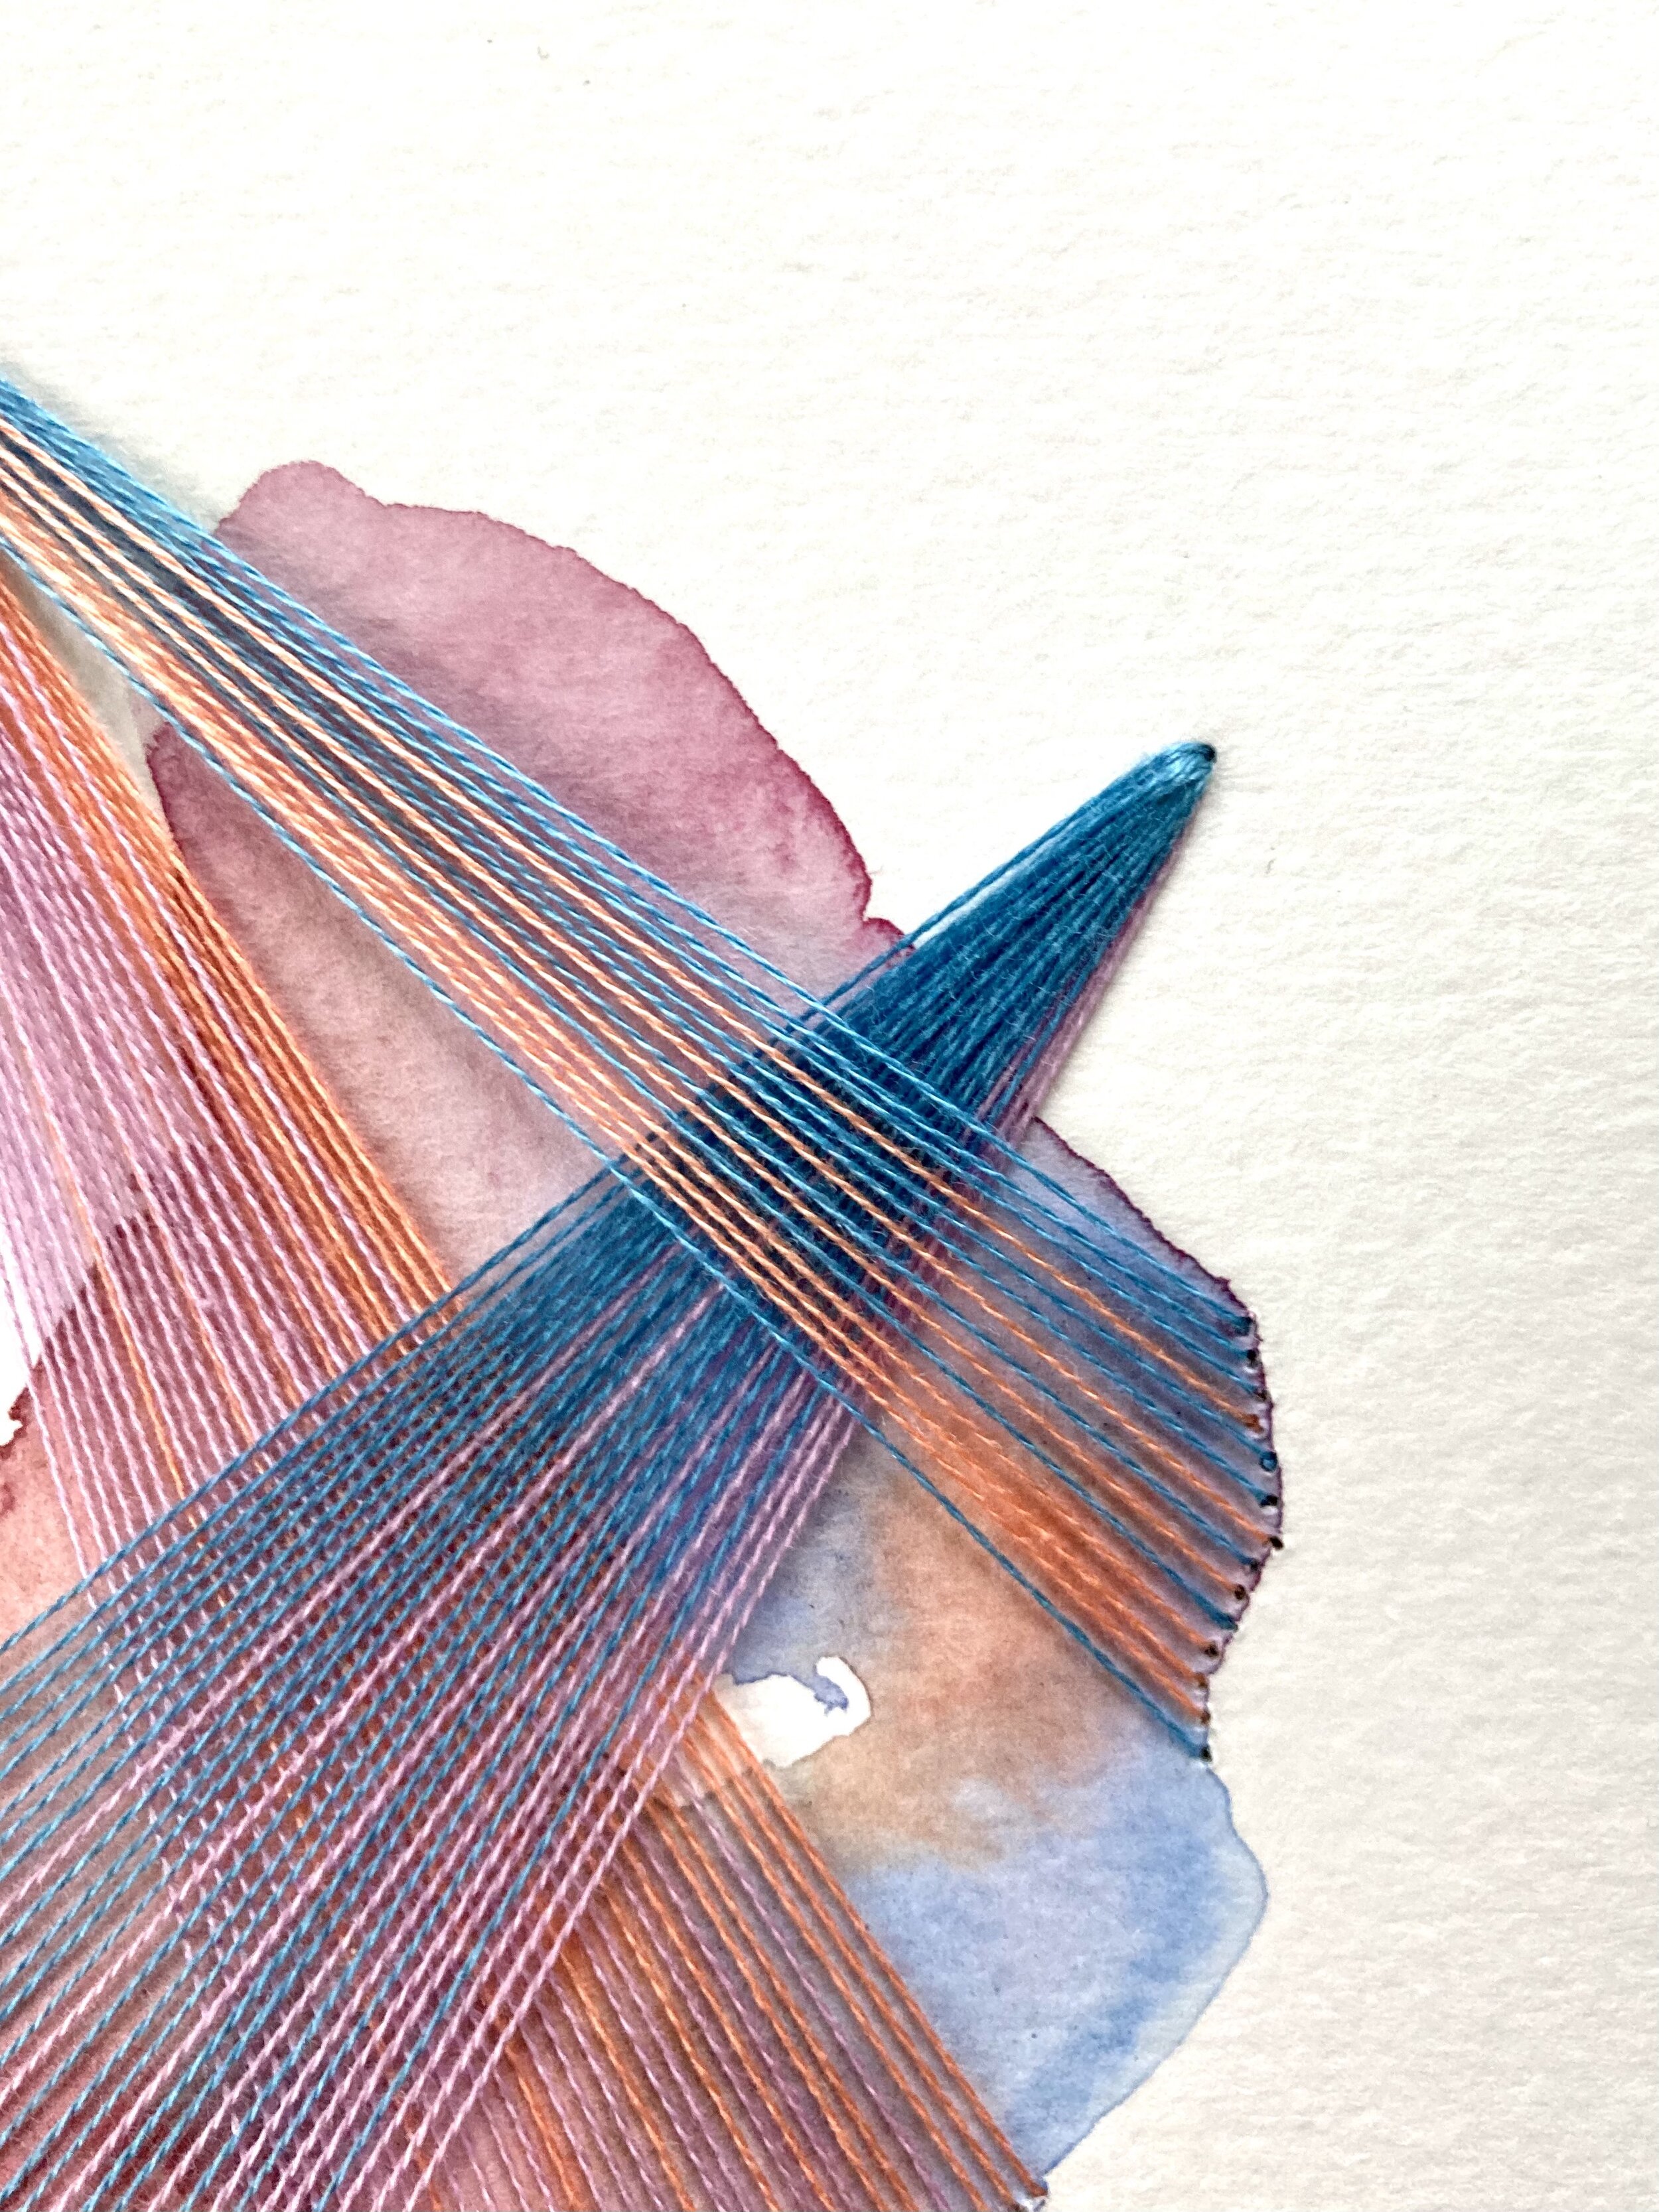 Watercolor and Embroidery in Cotton Candy Sky--detail 1